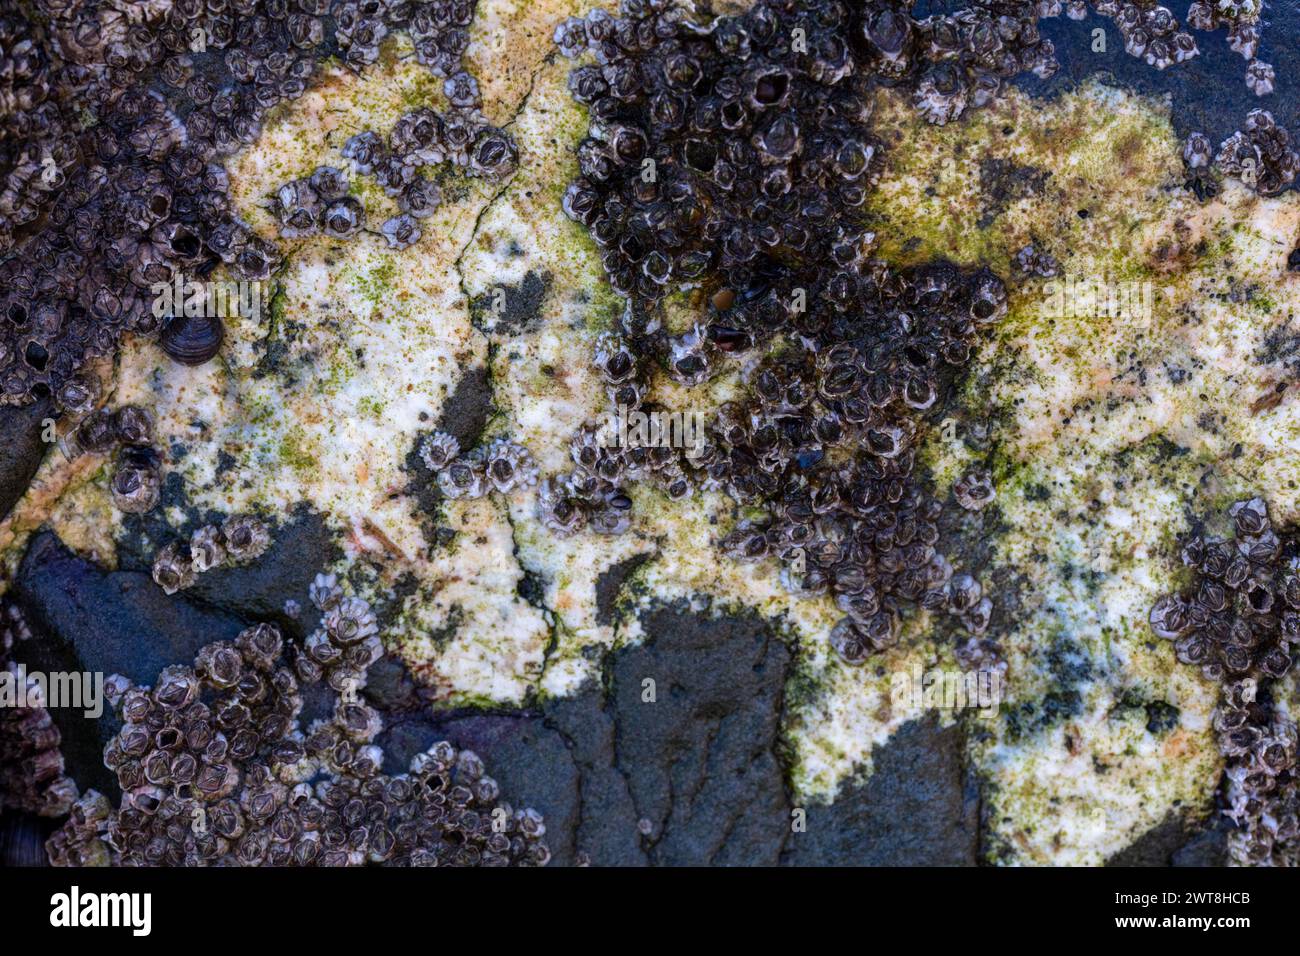 Colonies of barnacles lead sedate lives, never moving, on the intertidal zone of our United Kingdom marine landscape, forming artistic patterns Stock Photo